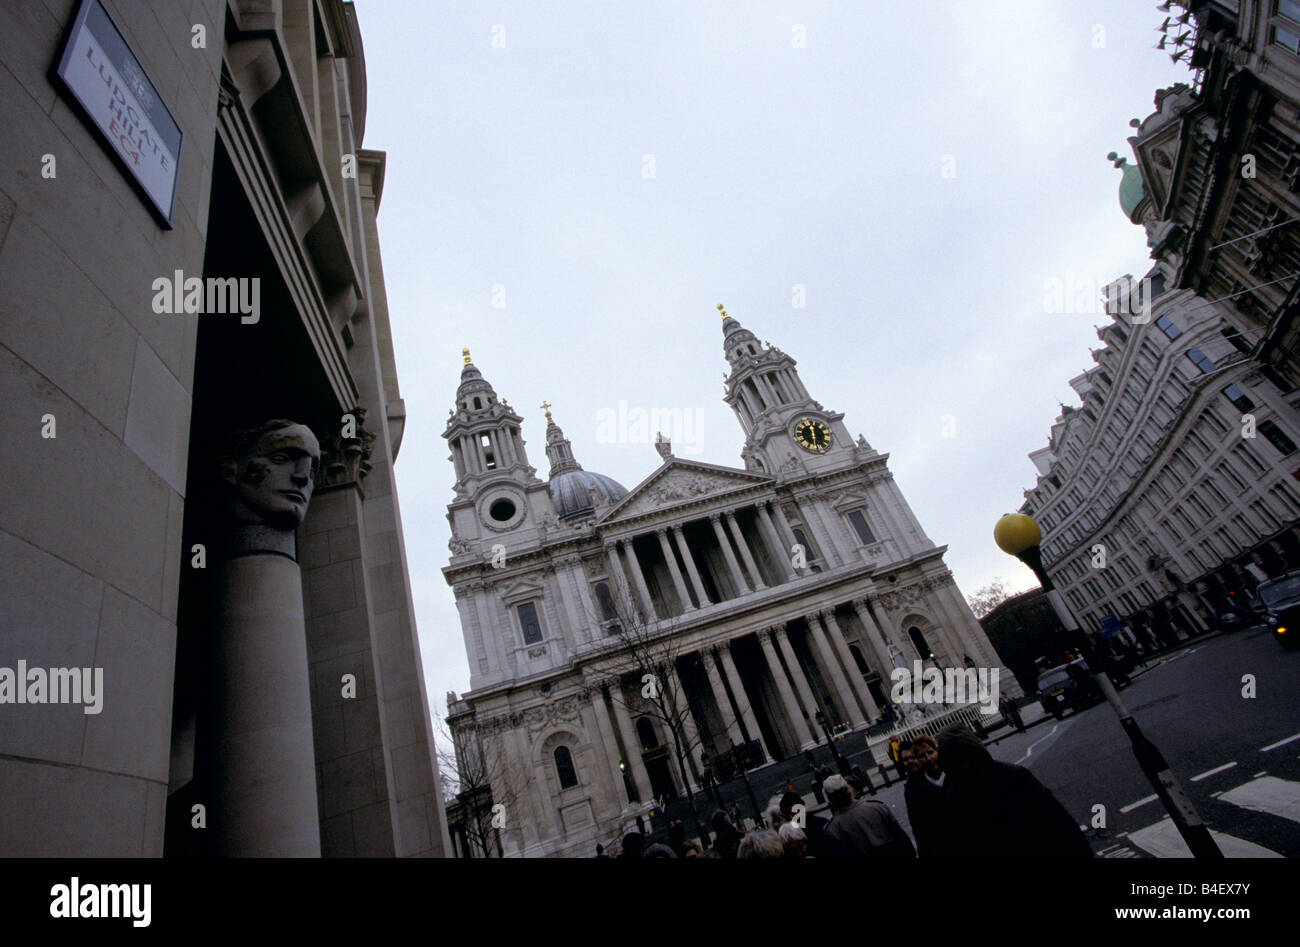 St Paul's Cathedral on Ludgate Hill in London, England, UK Stock Photo